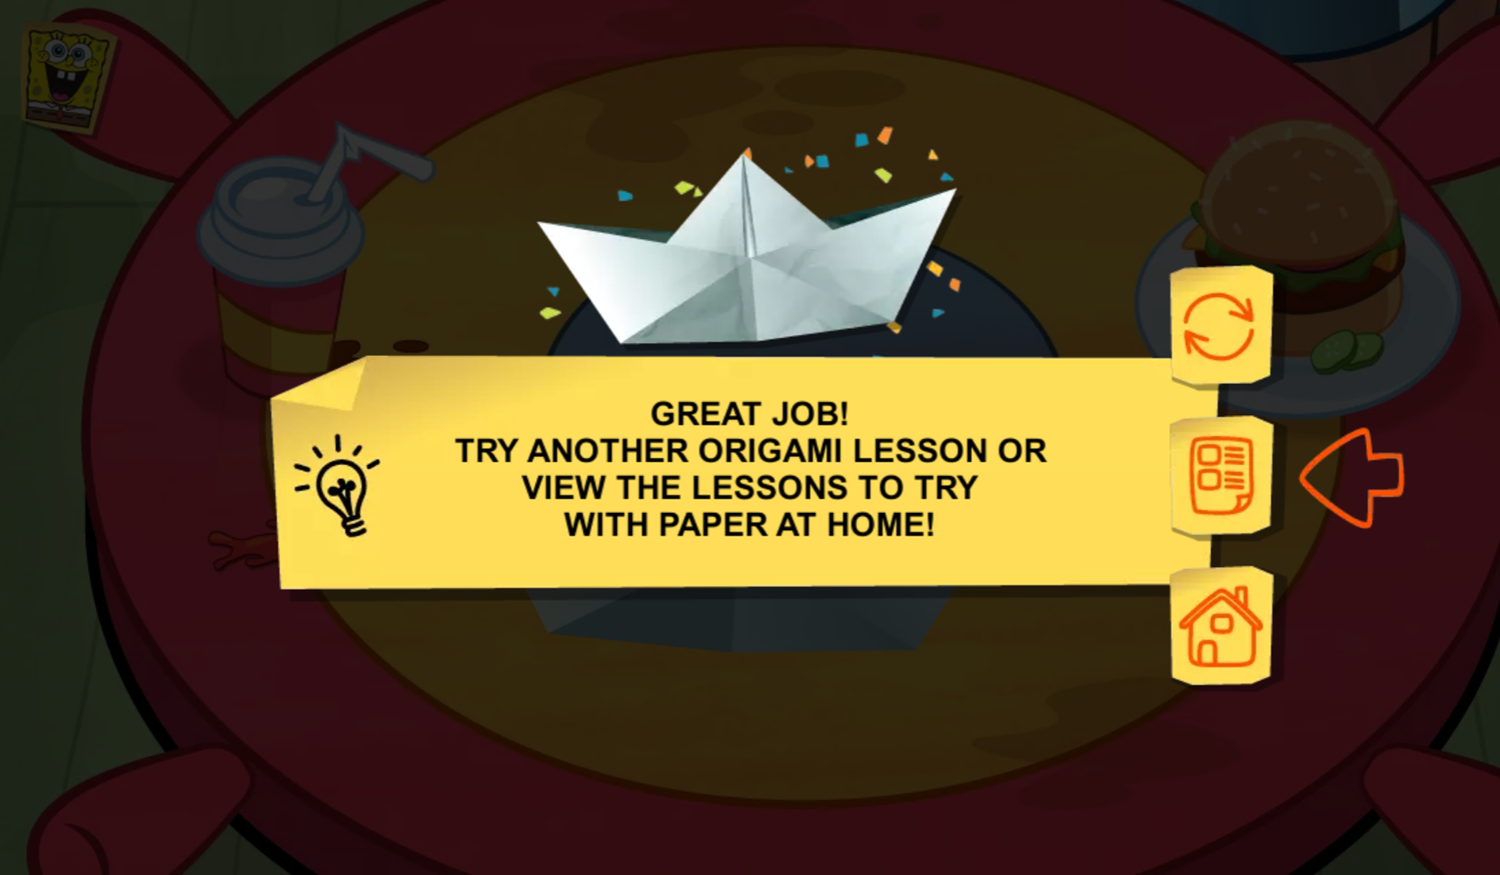 Learn Origami Game Level Complete Screenshot.